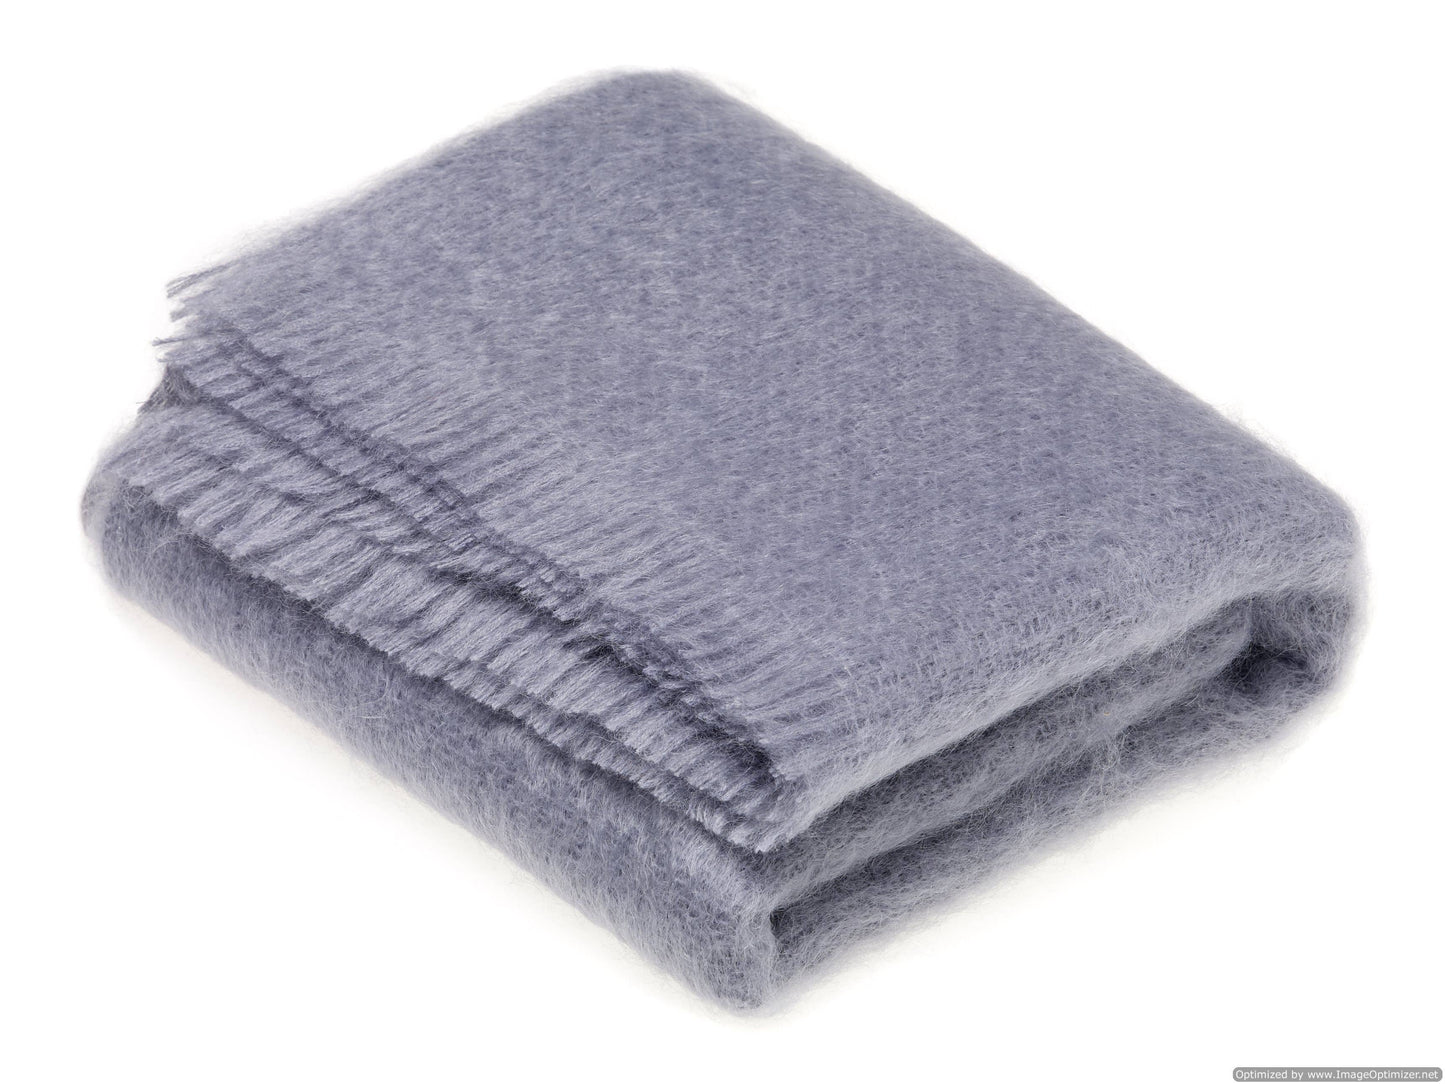 Luxury Mohair Throw Collection - Made in England: Flame